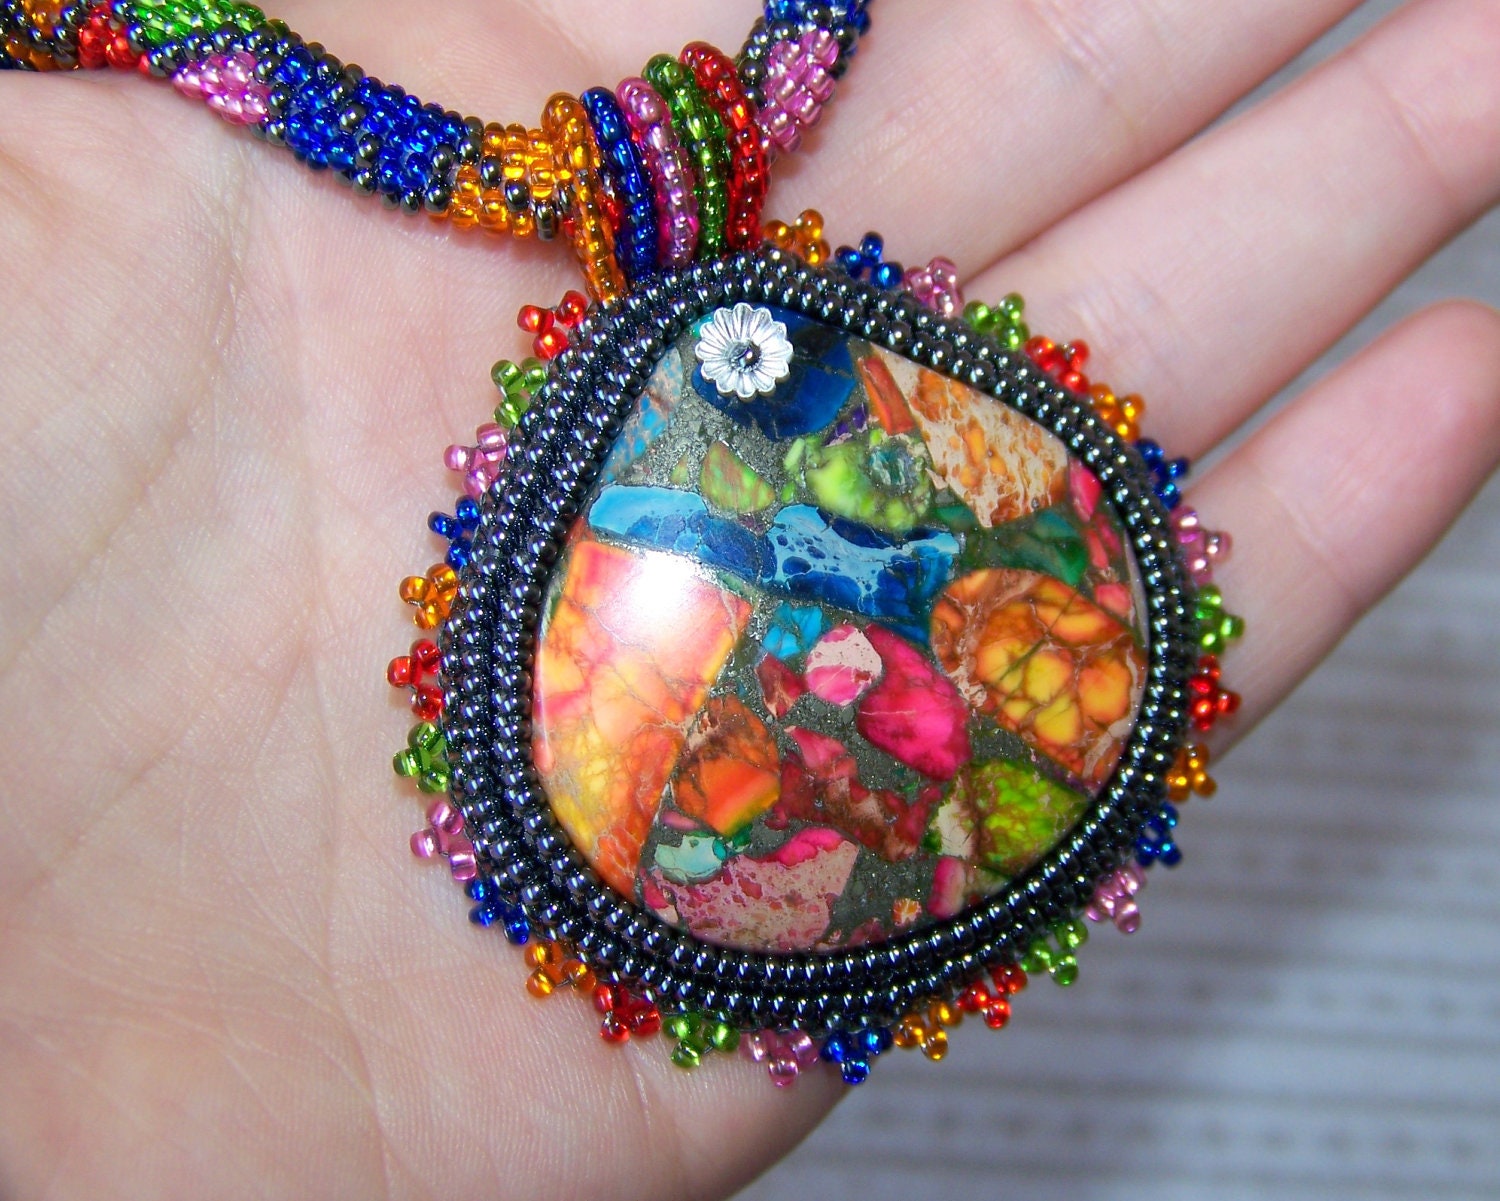 Summer Joy - Bead Embroidery Necklace with Rainbow Sea Jasper and Pyrite - Summer collection